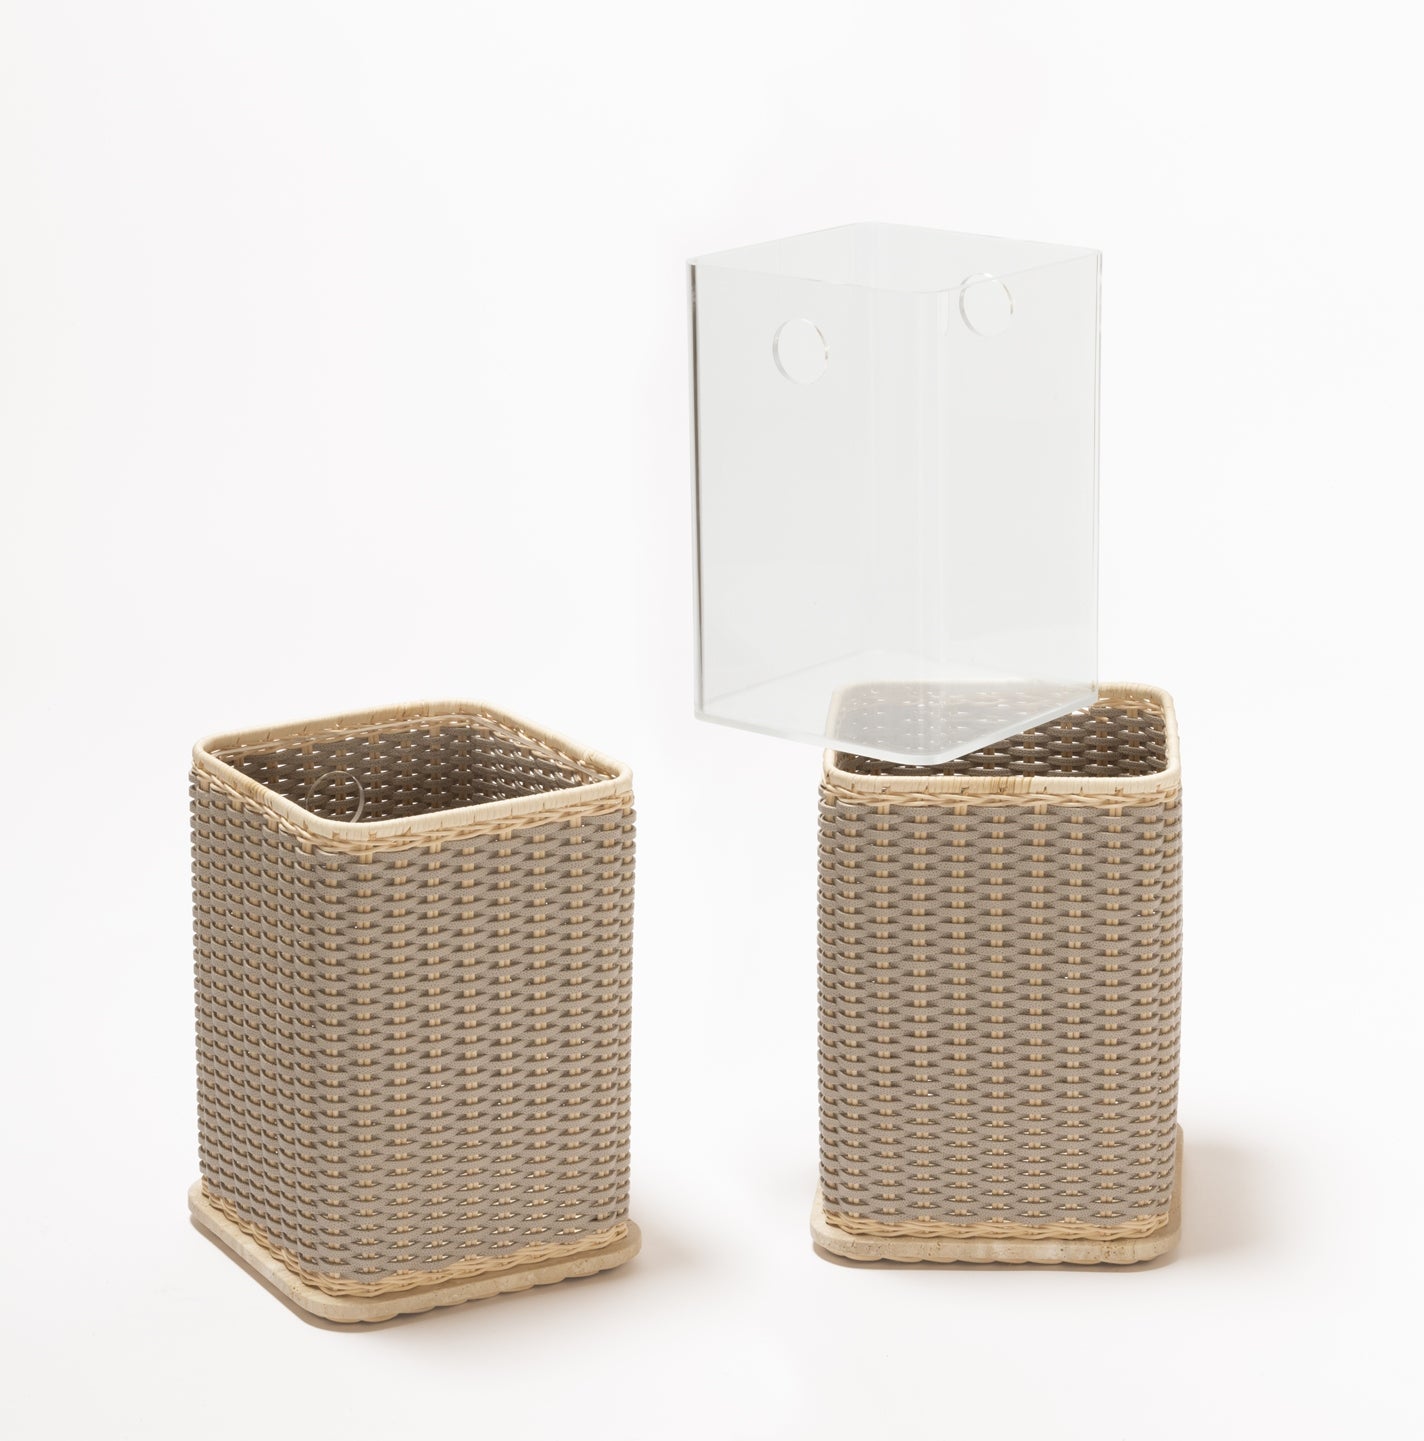 Pigment France Albi Leather & Rattan Travertine Bin | Woven leather and rattan structure | Features a travertine base | Removable plexiglass inner structure for easy cleaning | Explore Luxury Home Accessories at 2Jour Concierge, #1 luxury high-end gift & lifestyle shop